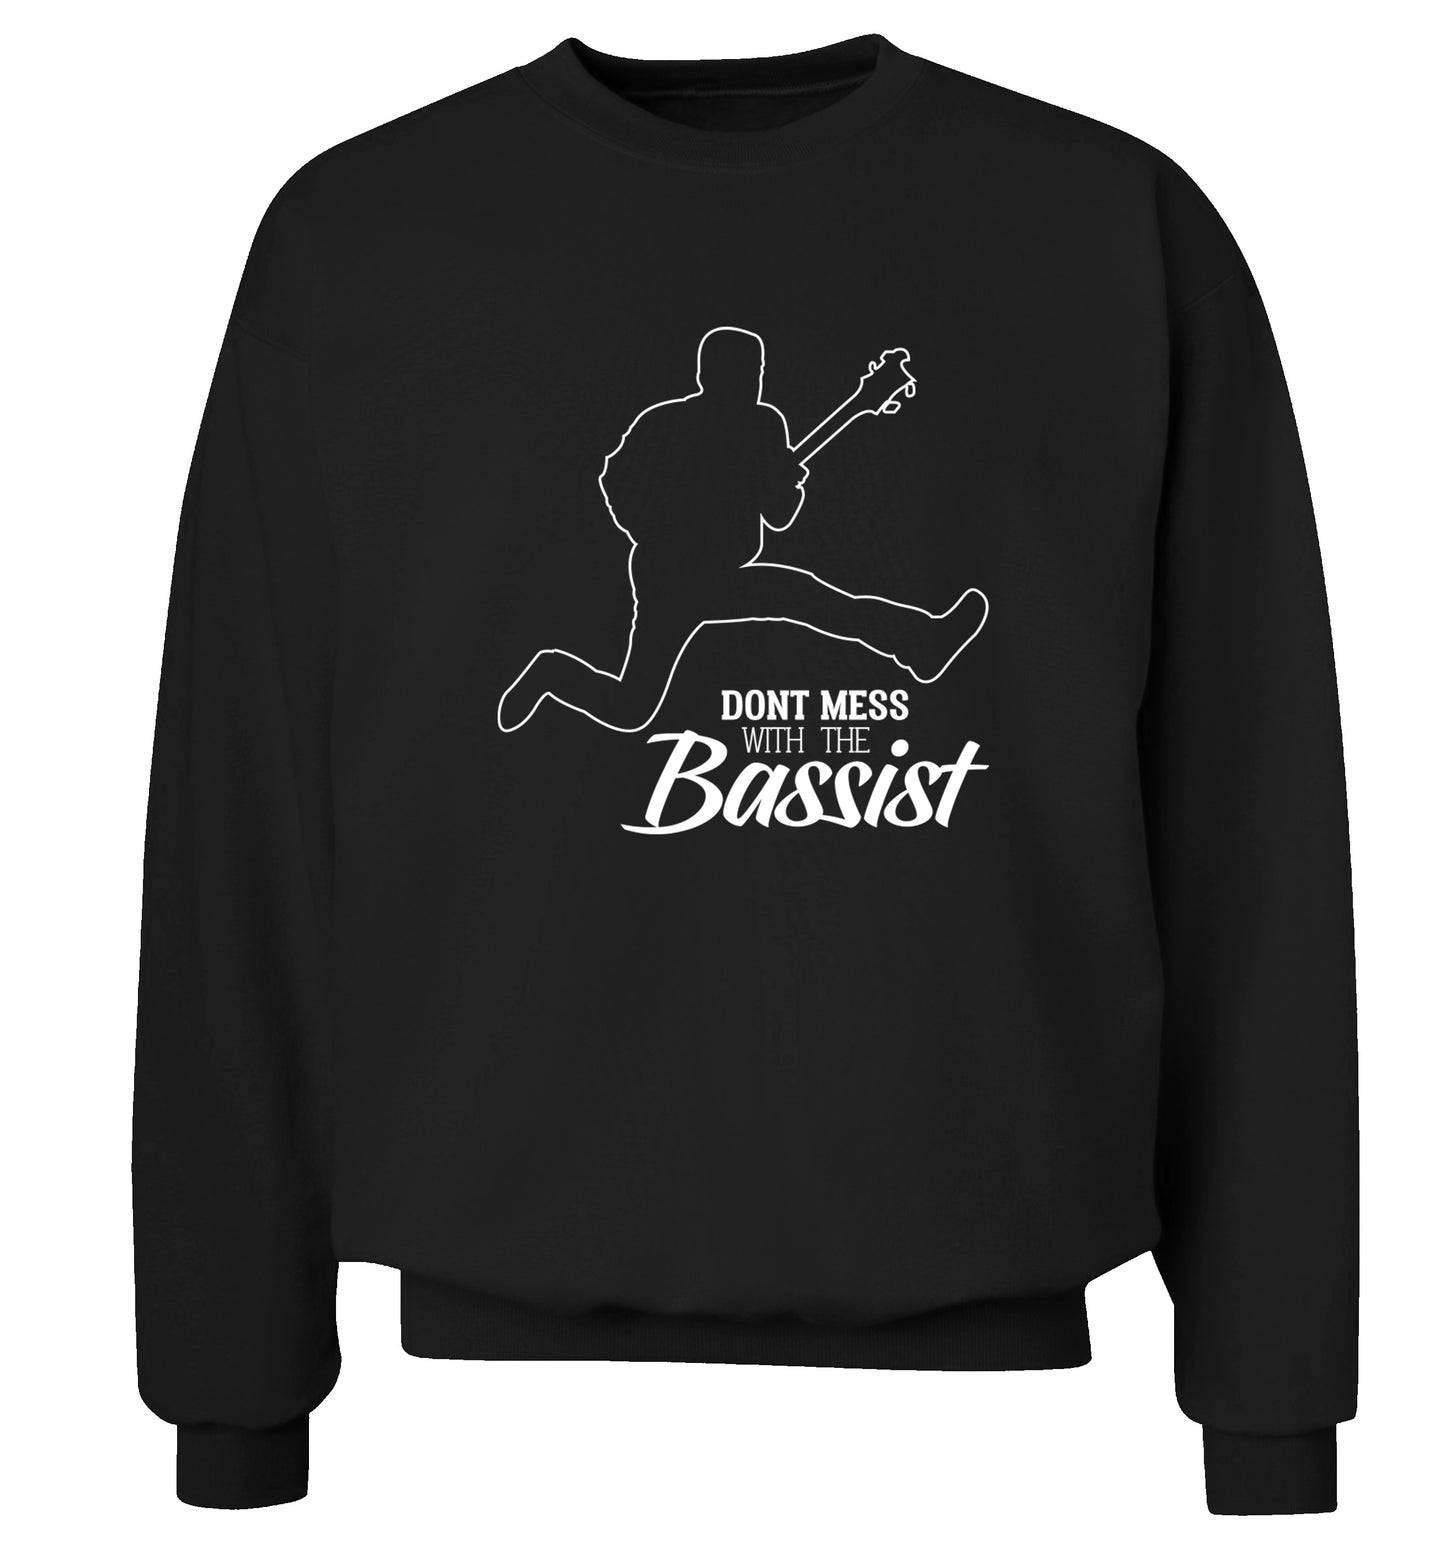 Dont mess with the bassist Adult's unisex black Sweater 2XL